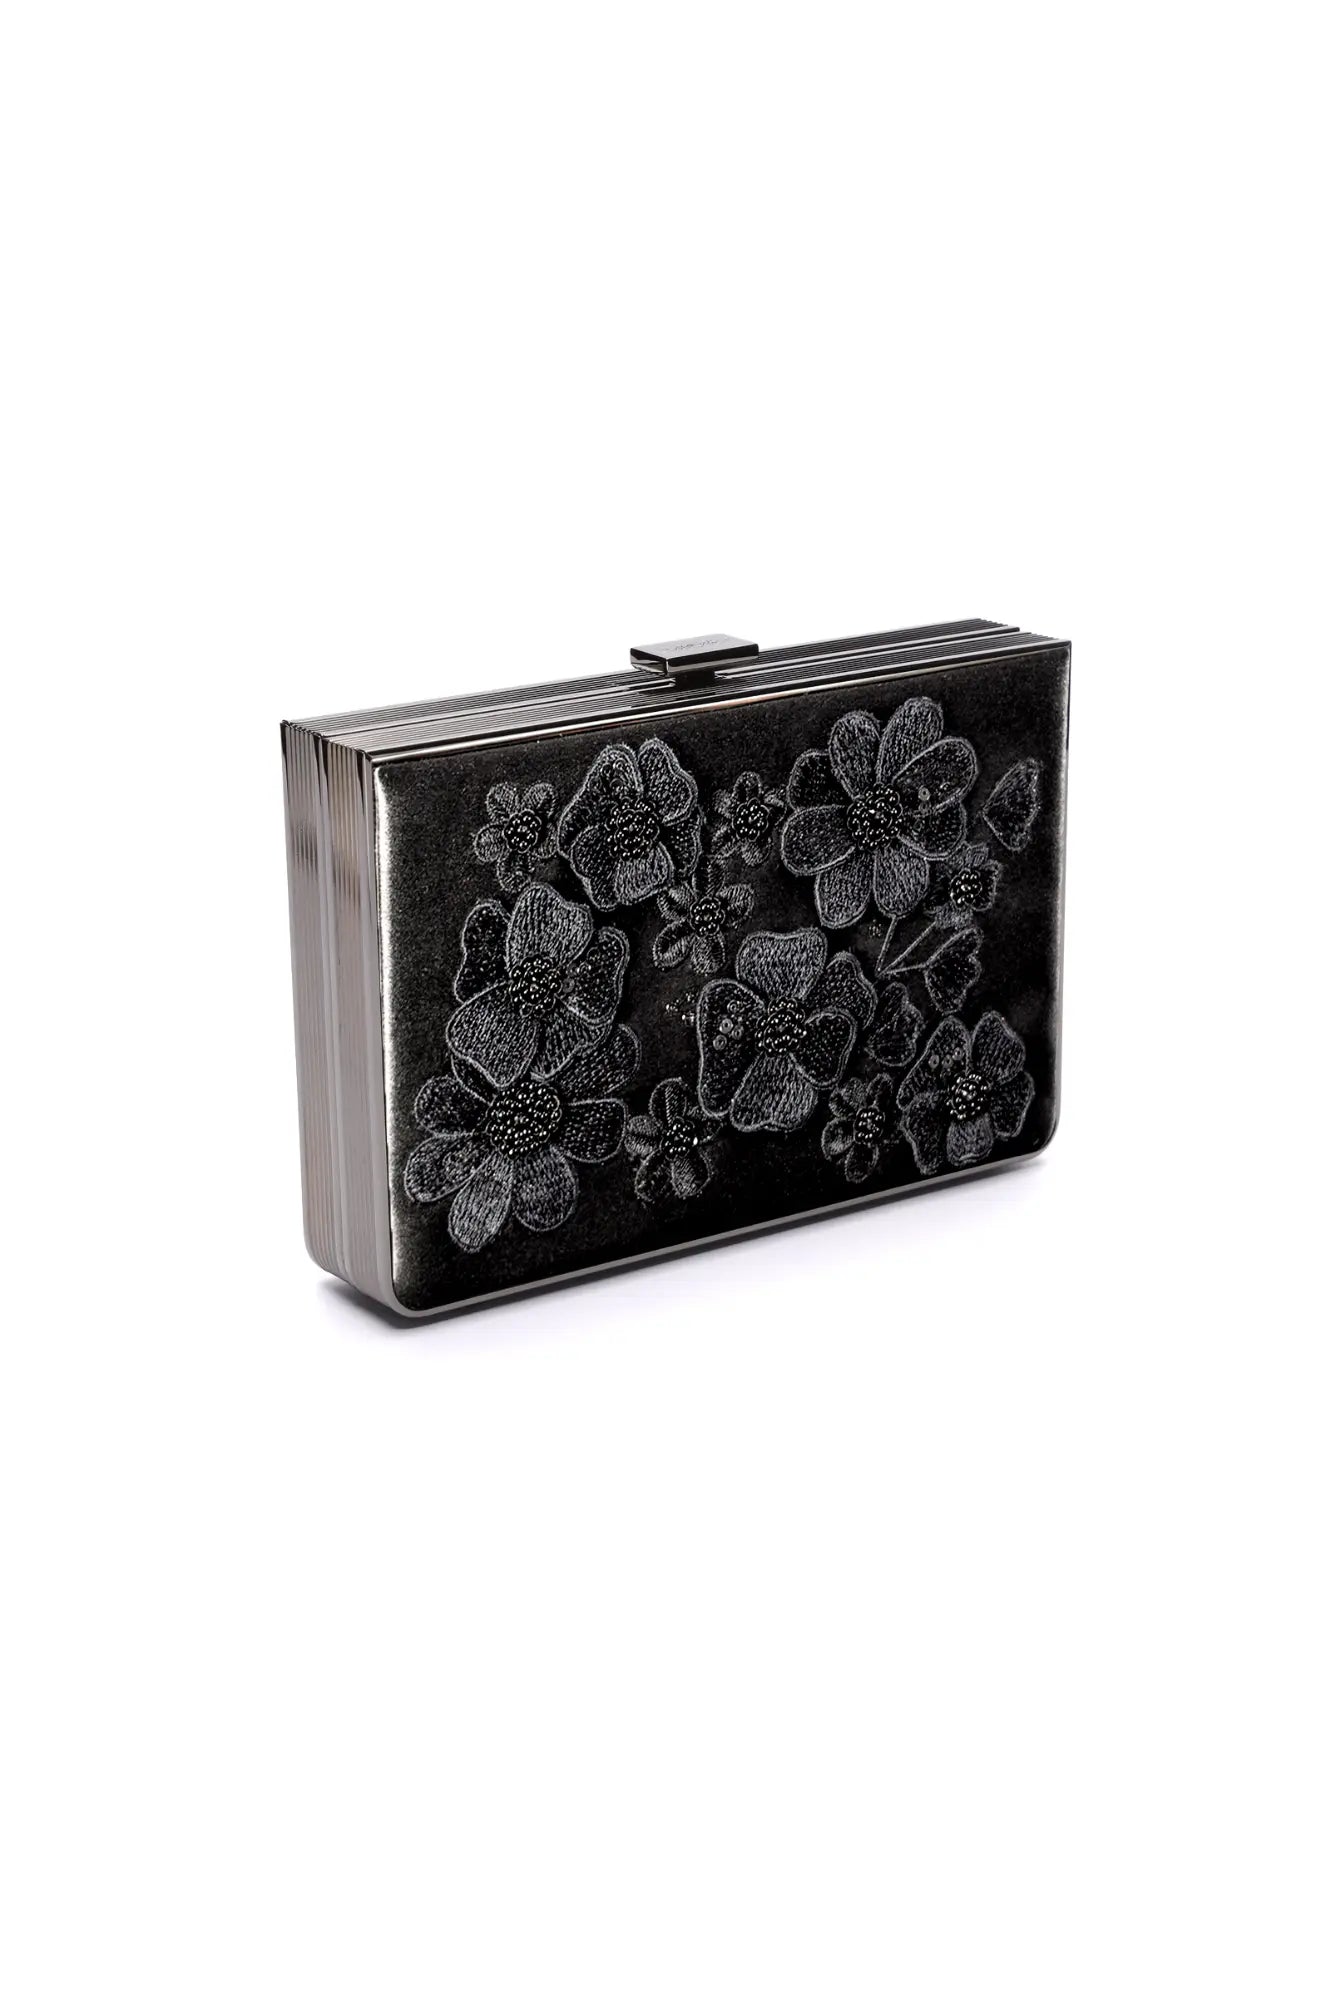 Black Venezia evening clutch with 3D floral embroidery on a white background.
Product Name: MICAELA - Black Satin Floral Embroidery Clutch from The Bella Rosa Collection.